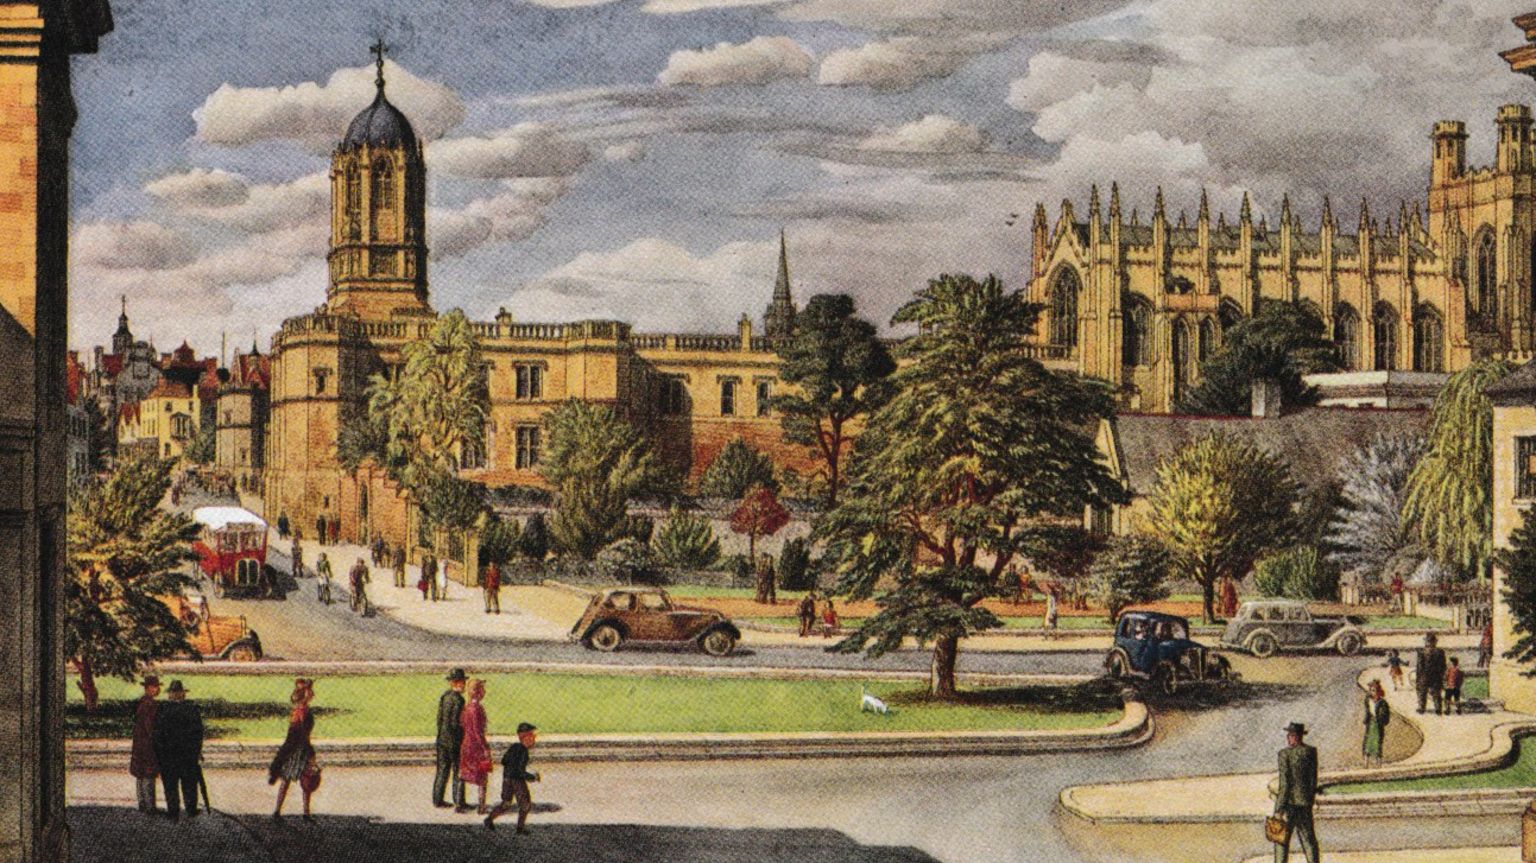 How the St Aldate's scheme might have looked with a grass roundabout in front of Christ Church Meadow and old-style cars and buses using the road. People seem to be walking on pavements and into the road 